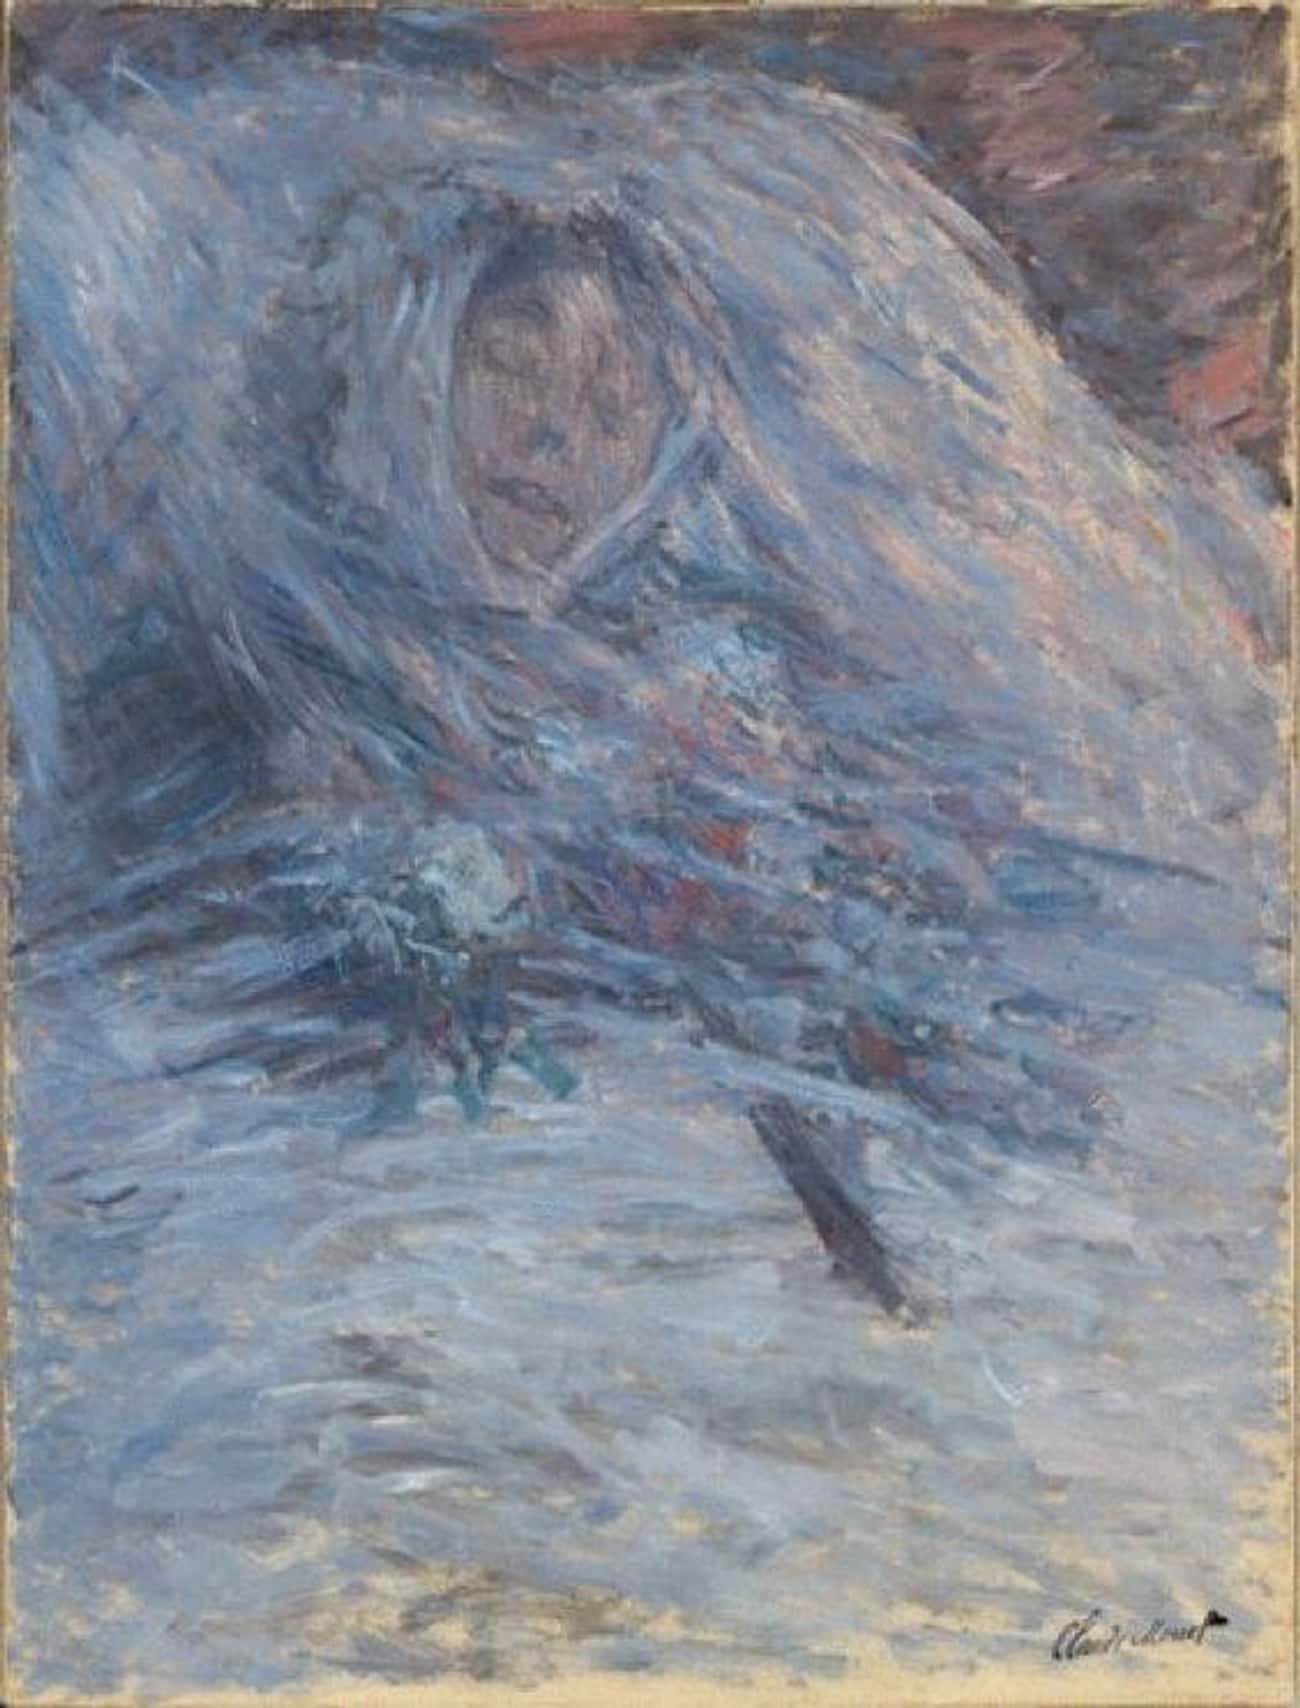 'Camille Monet on Her Deathbed' By Claude Monet, 1879